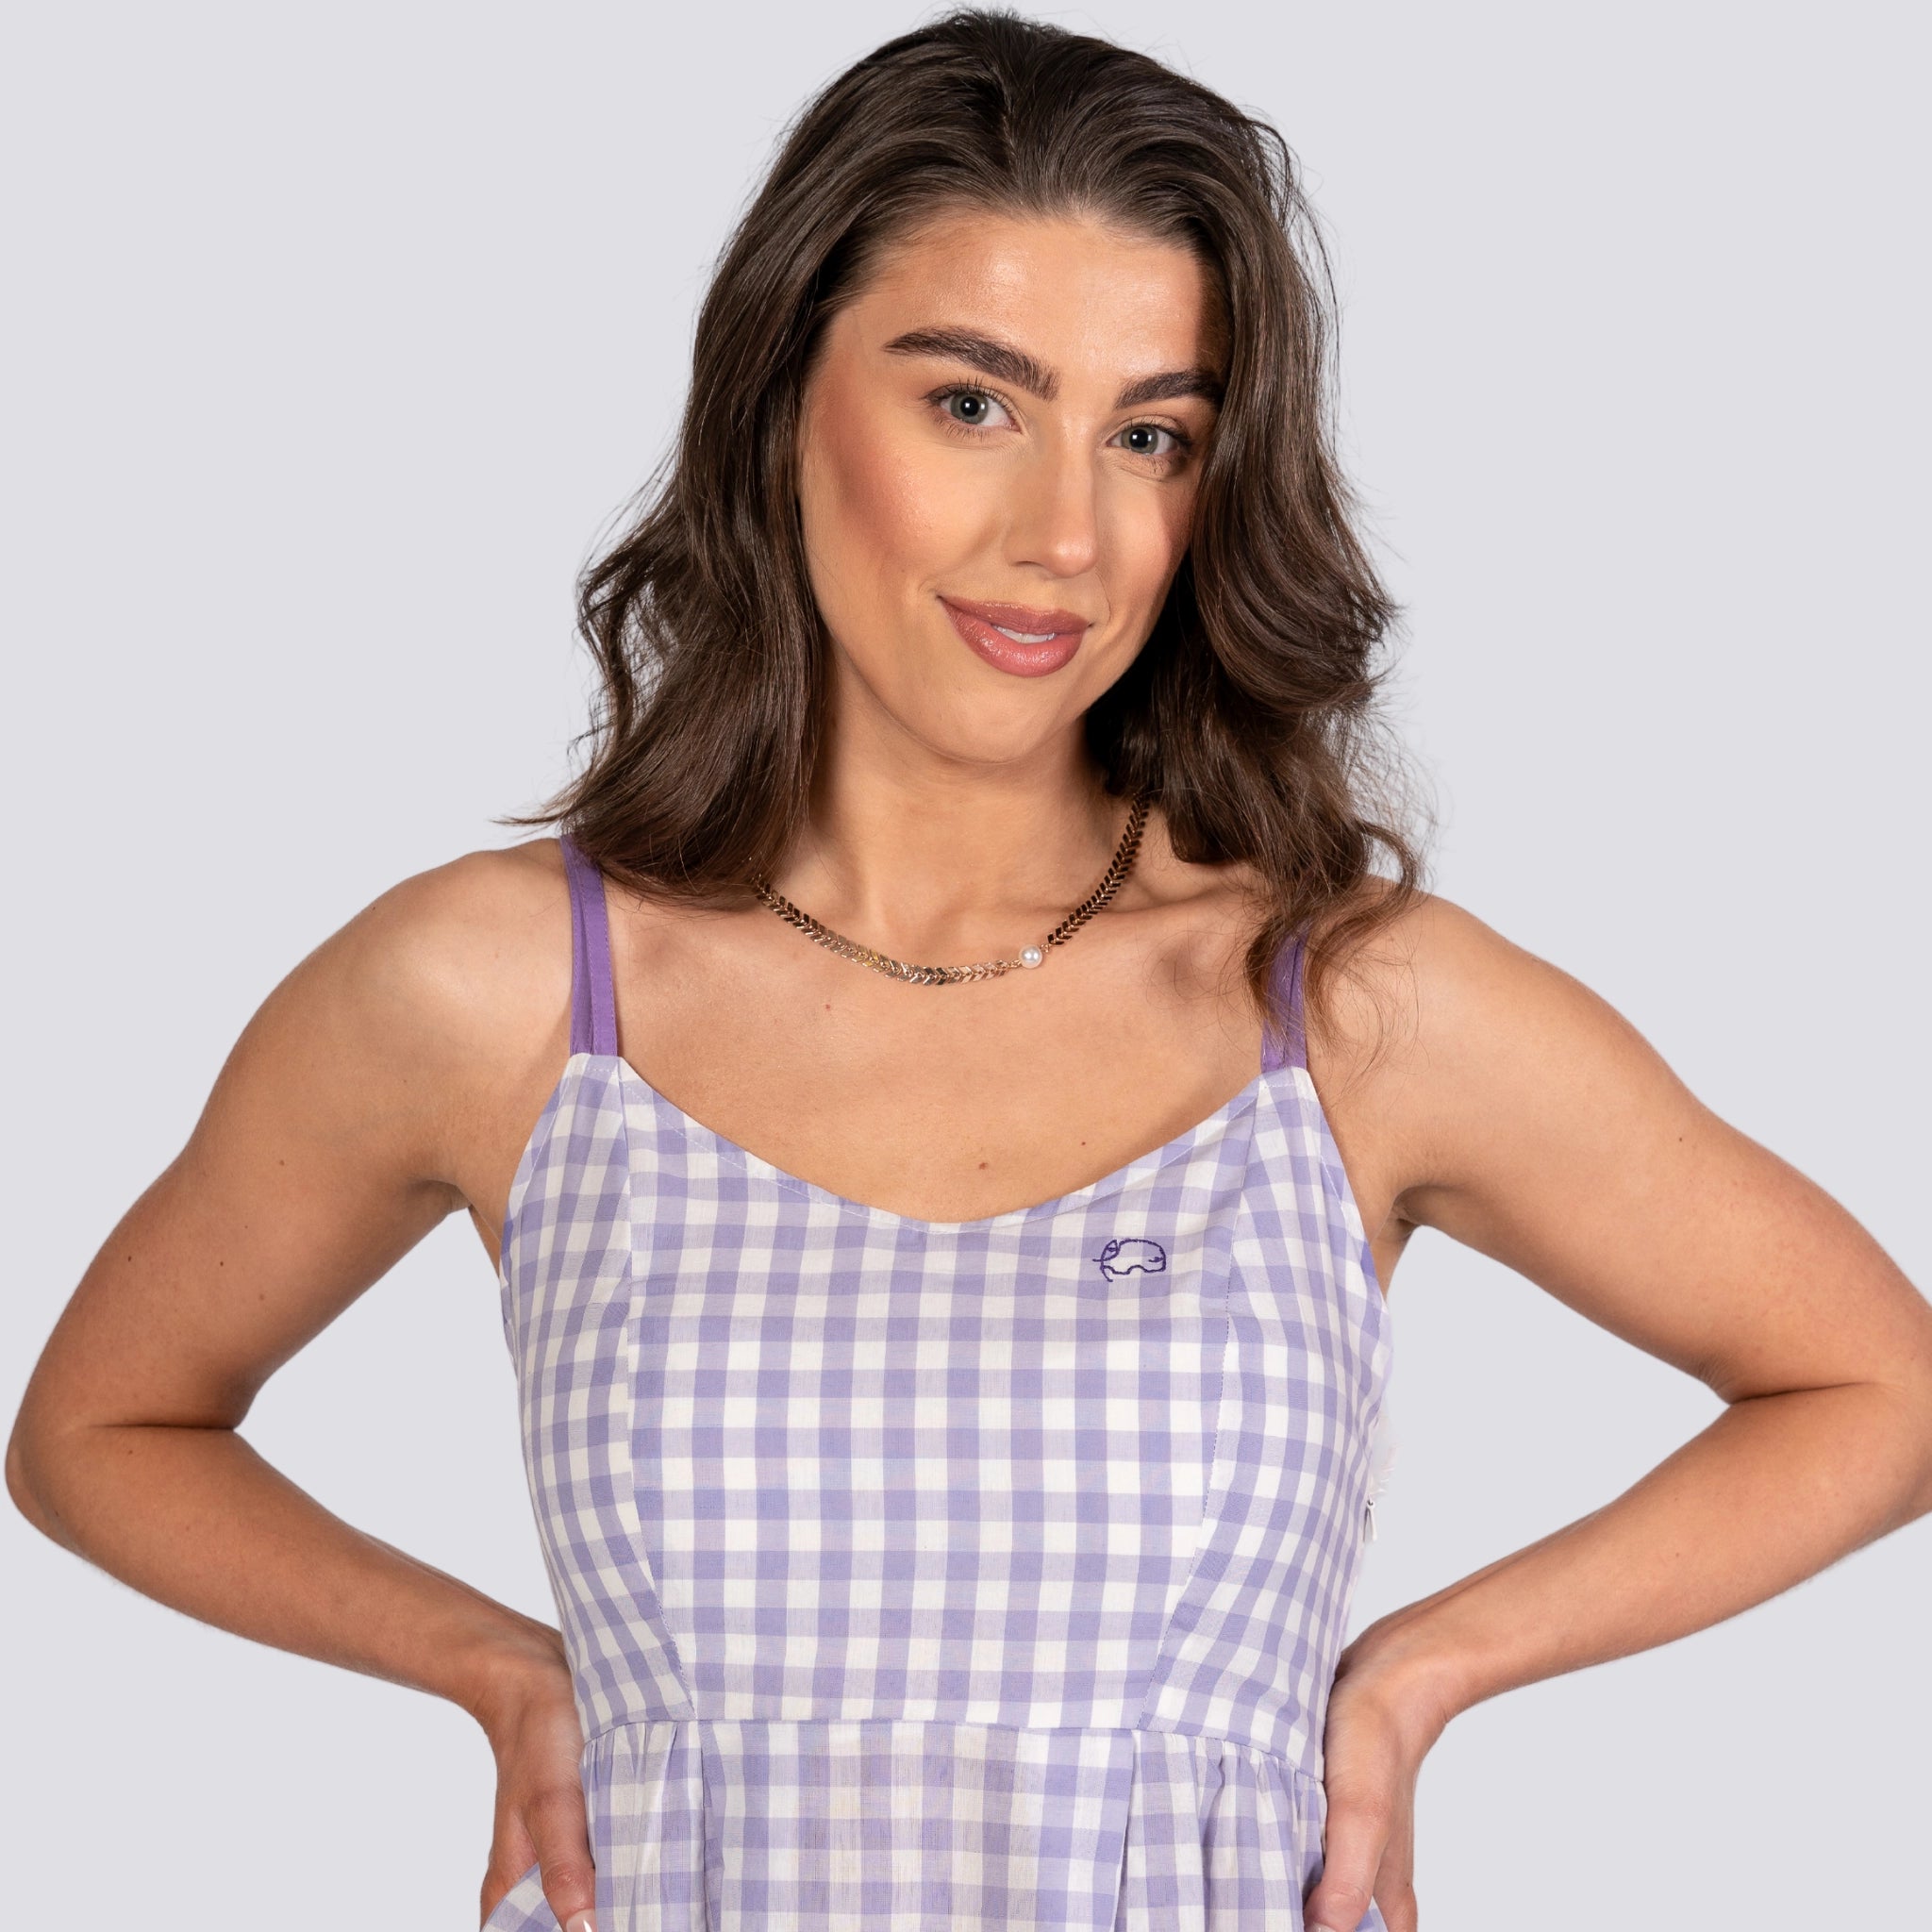 A confident woman in a Karee lavender plaid cotton mini dress with her hands on her hips, smiling at the camera against a gray background.